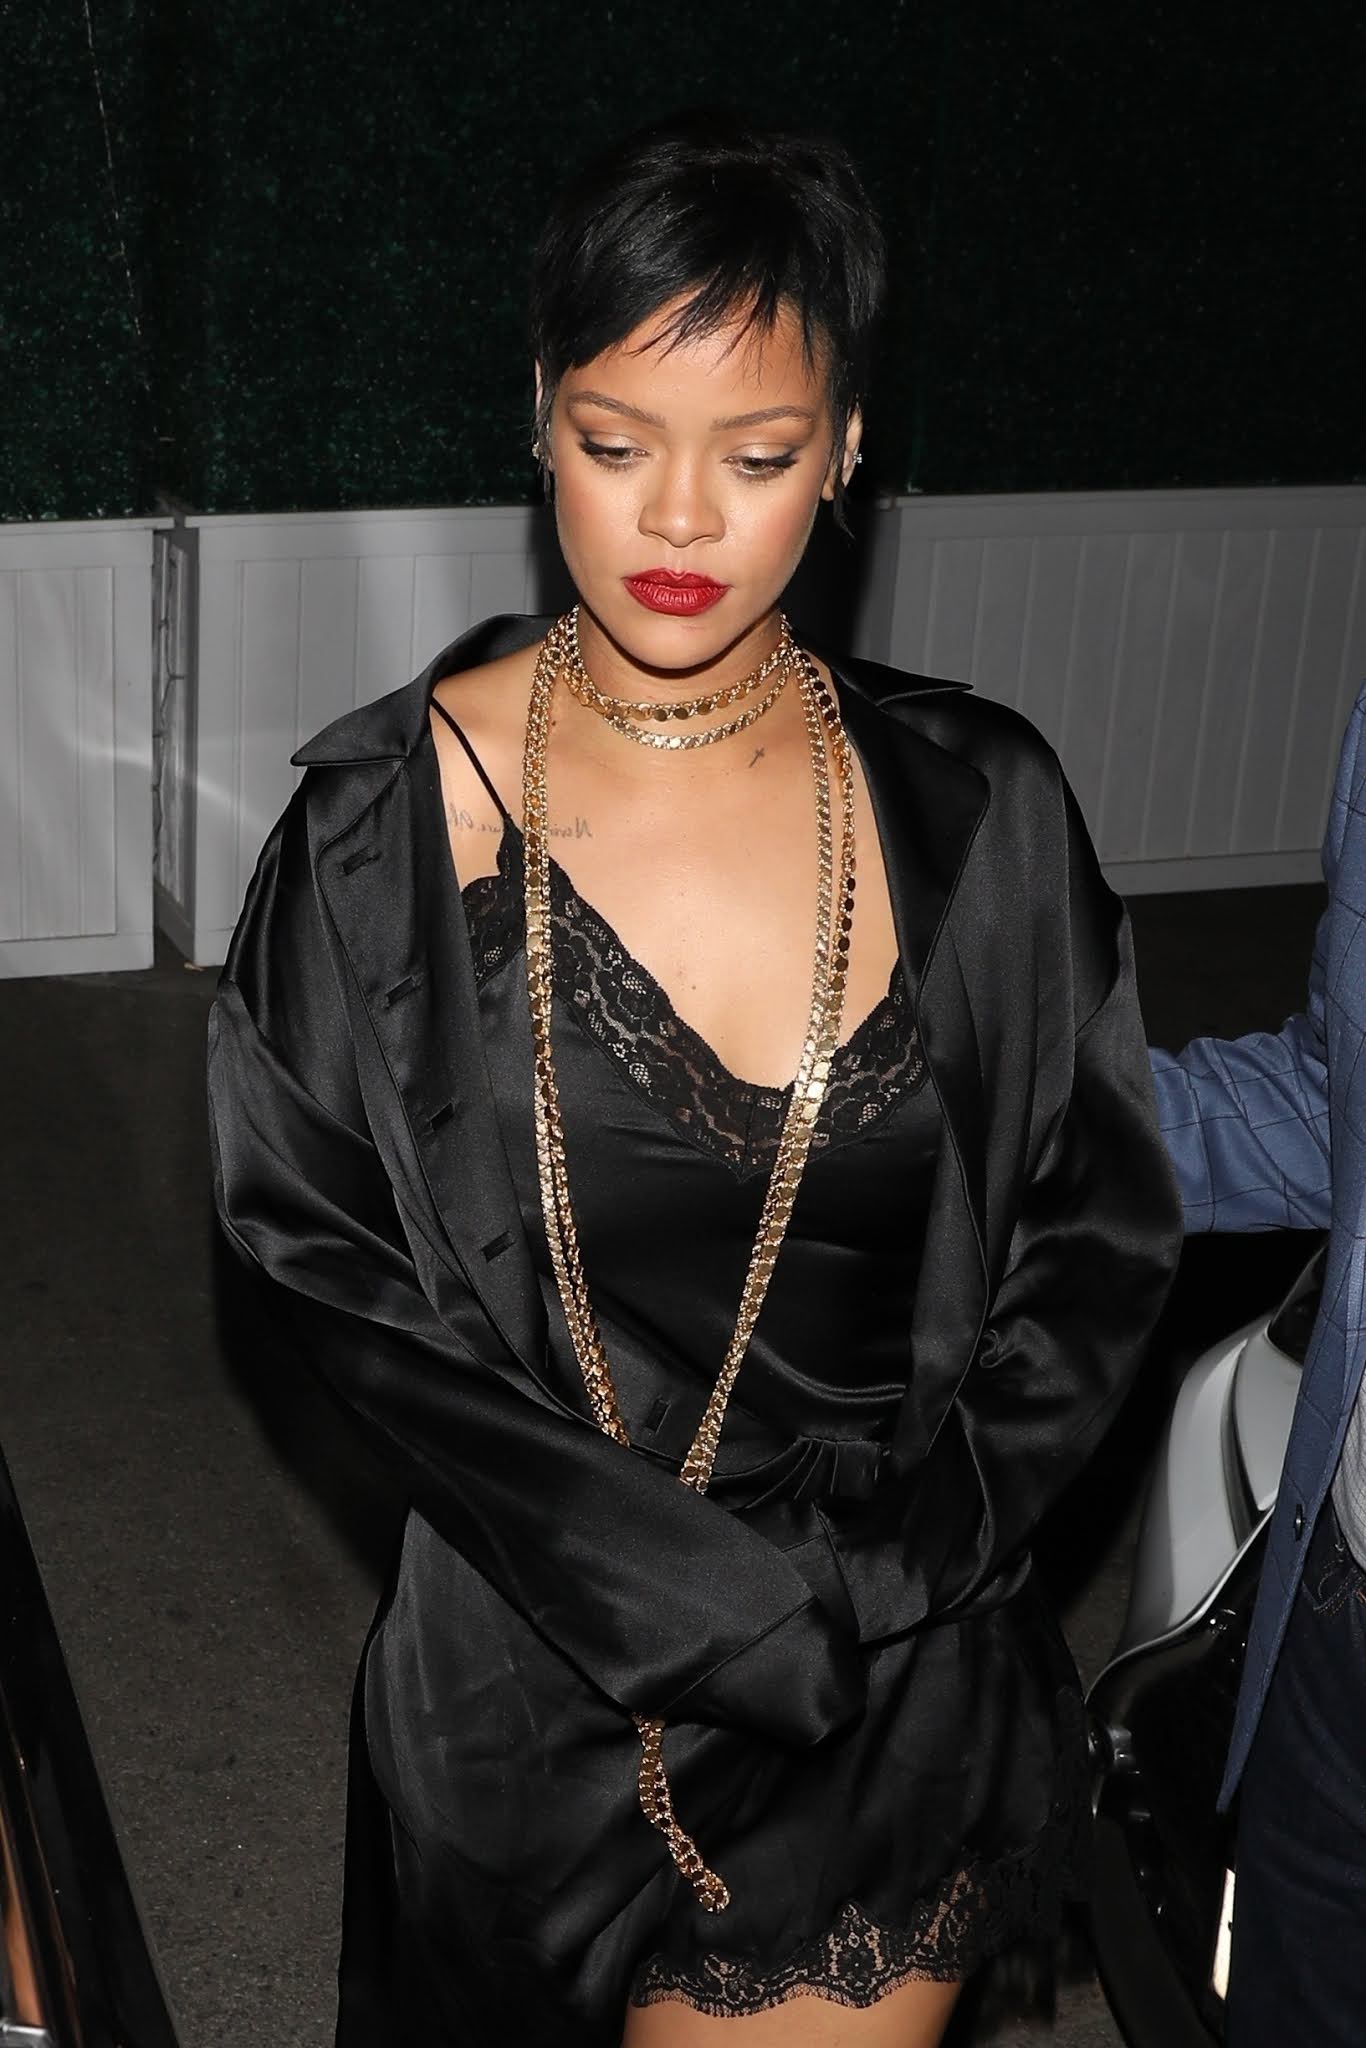 Rihanna in a slinky lingerie set for night out with friends at Delilah nightclub.